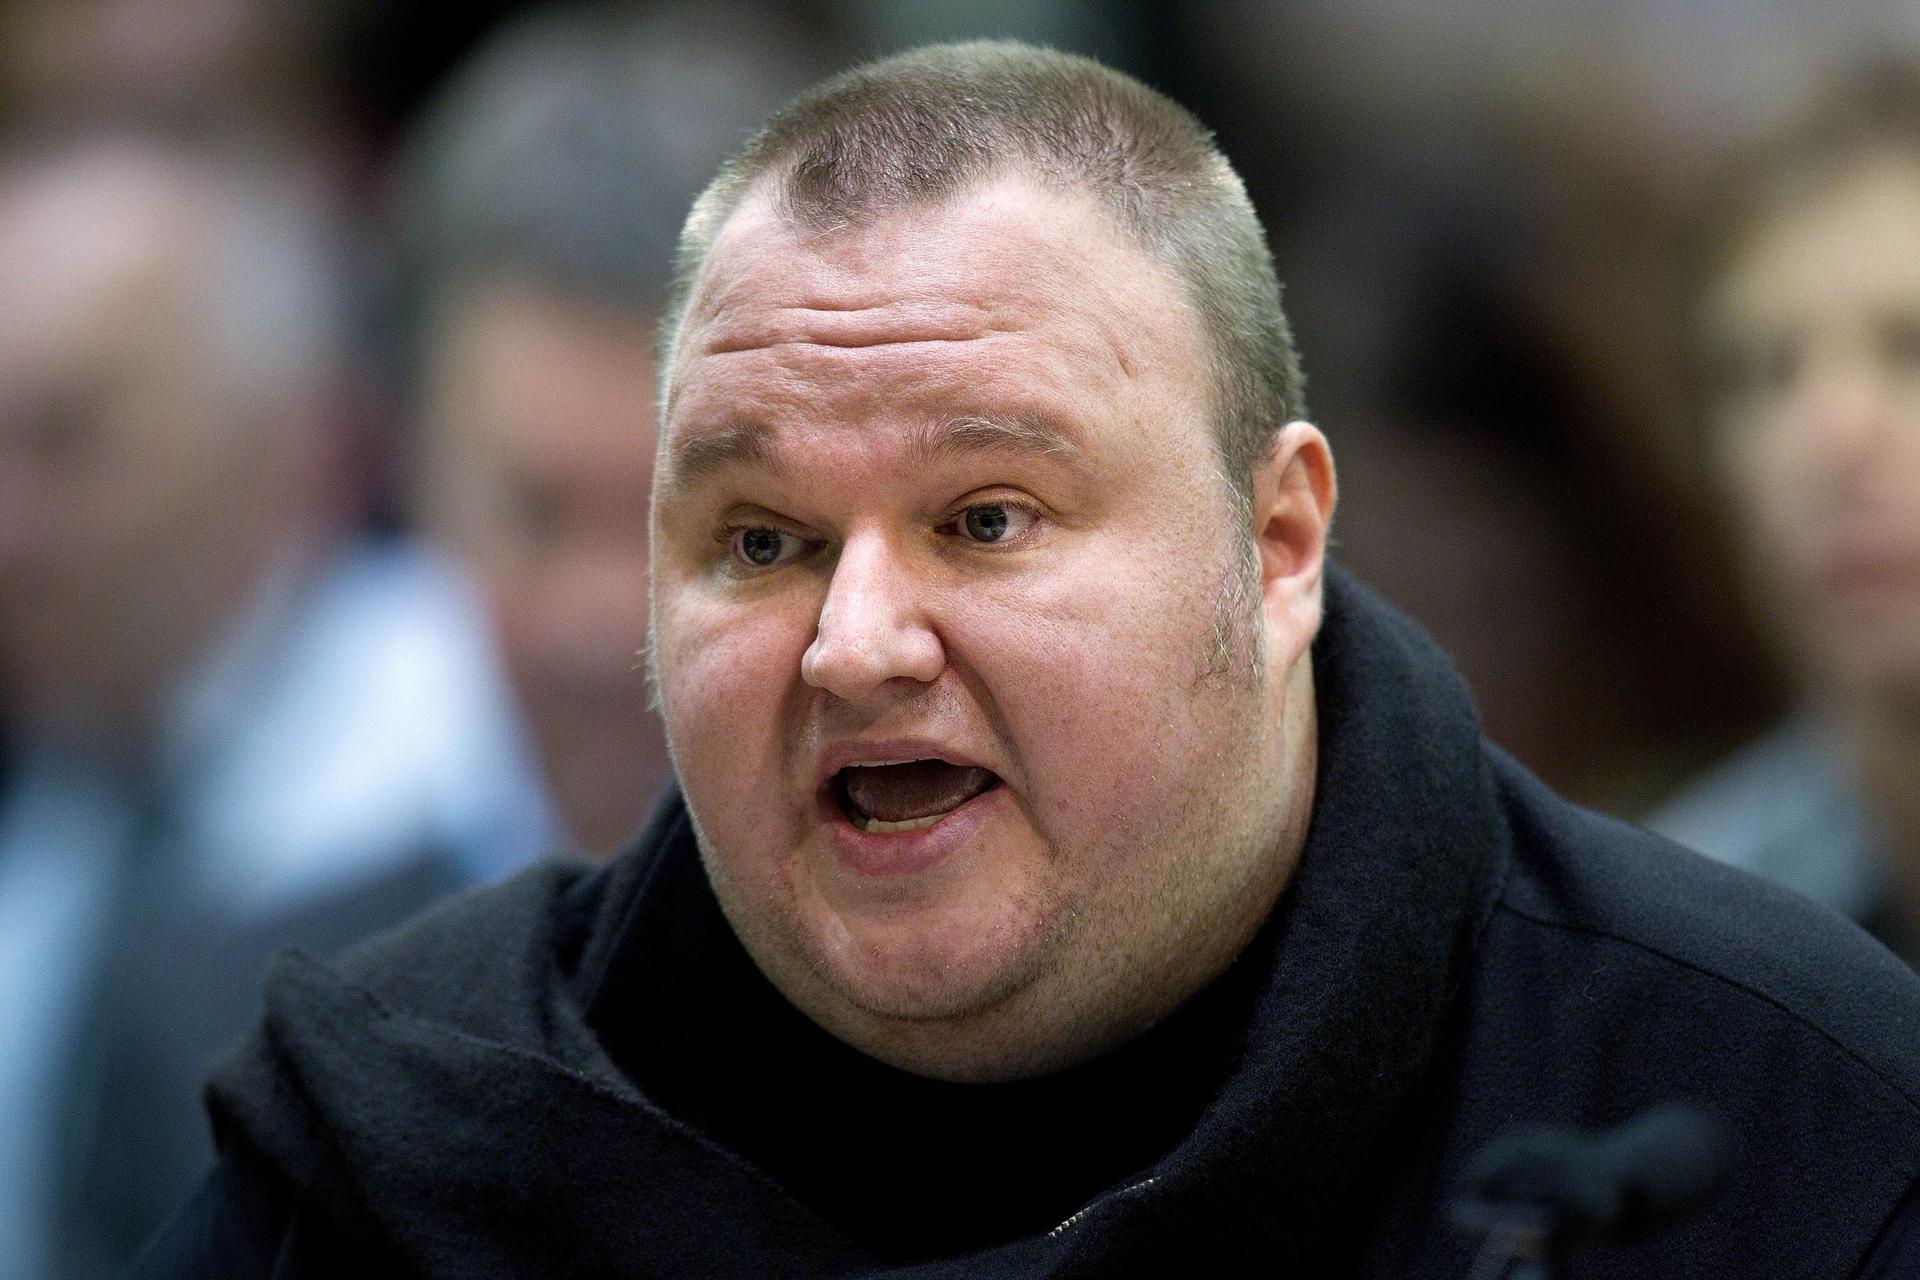 Kim Dotcom has about HK$300 million financial assets currently frozen in restraint order.